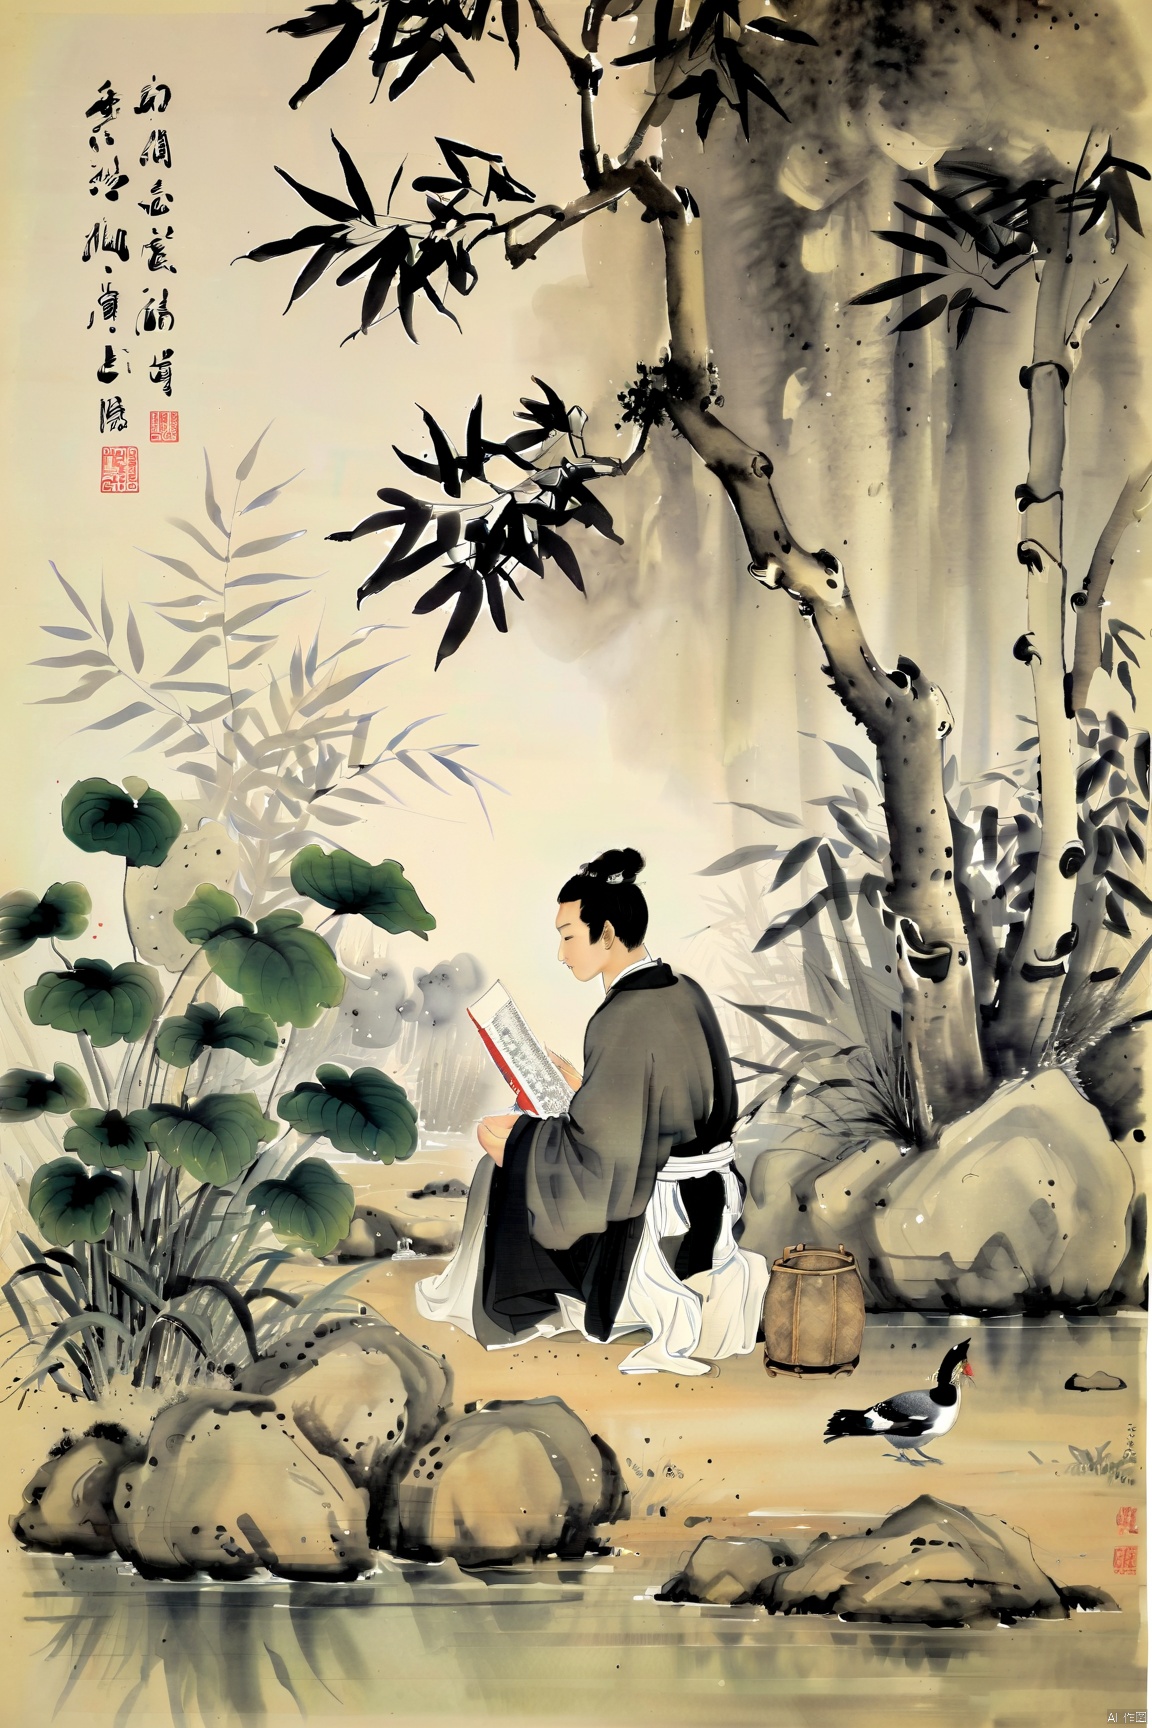  In a secluded valley, a Taoist disciple sits by a stream, engrossed in reading ancient scriptures on bamboo slips. Surrounded by lush trees, sunlight dapples the ground through the foliage, creating a harmonious blend of nature and the tranquility of Taoism., traditional chinese ink painting,black and white ink painting